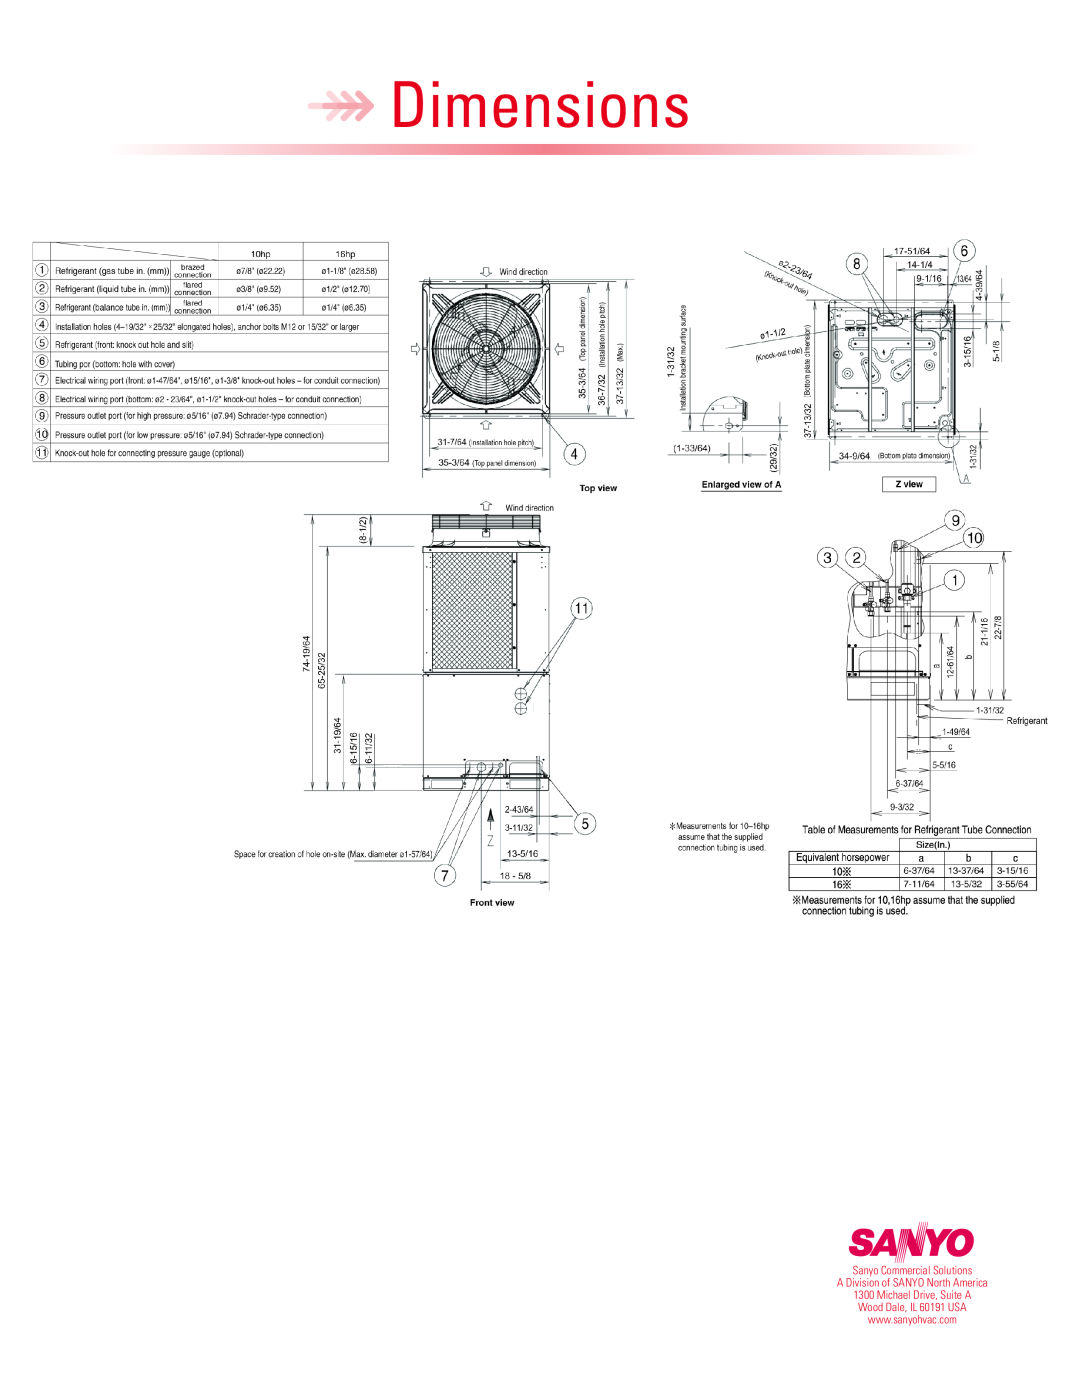 Sanyo CHDX09053 warranty Dimensions, Sanyo Commercial Solutions, A Division of SANYO North America, Michael Drive, Suite A 